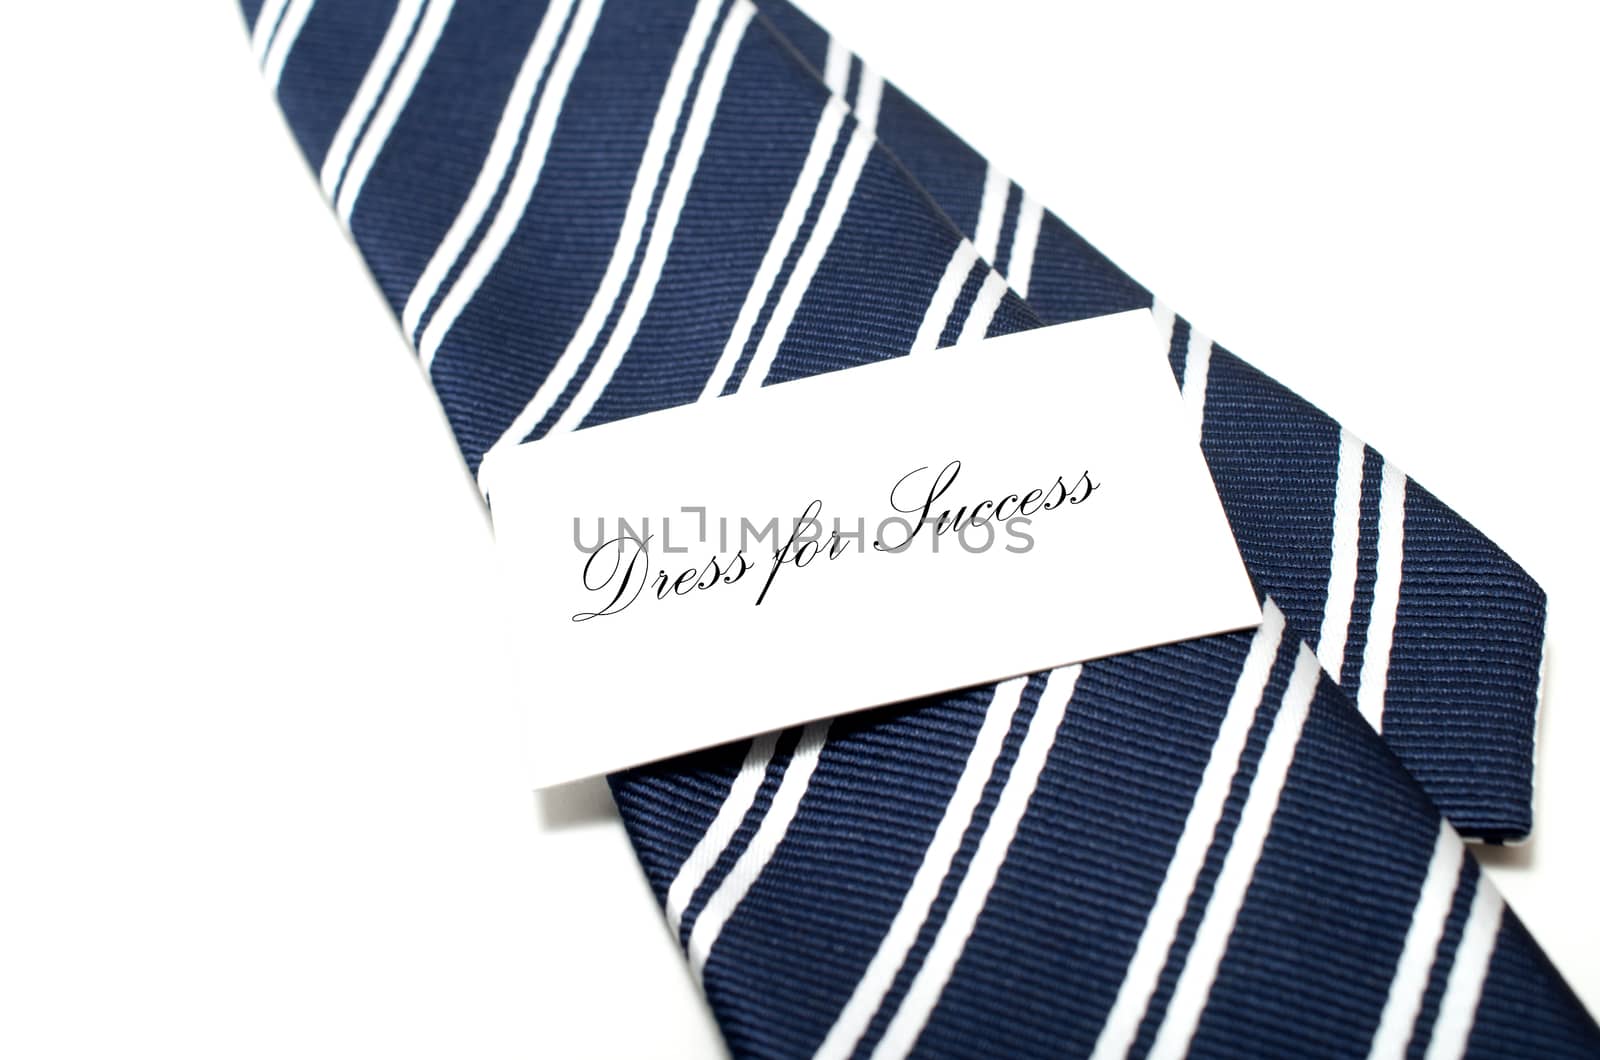 Dress for success tag on blue tie by daoleduc